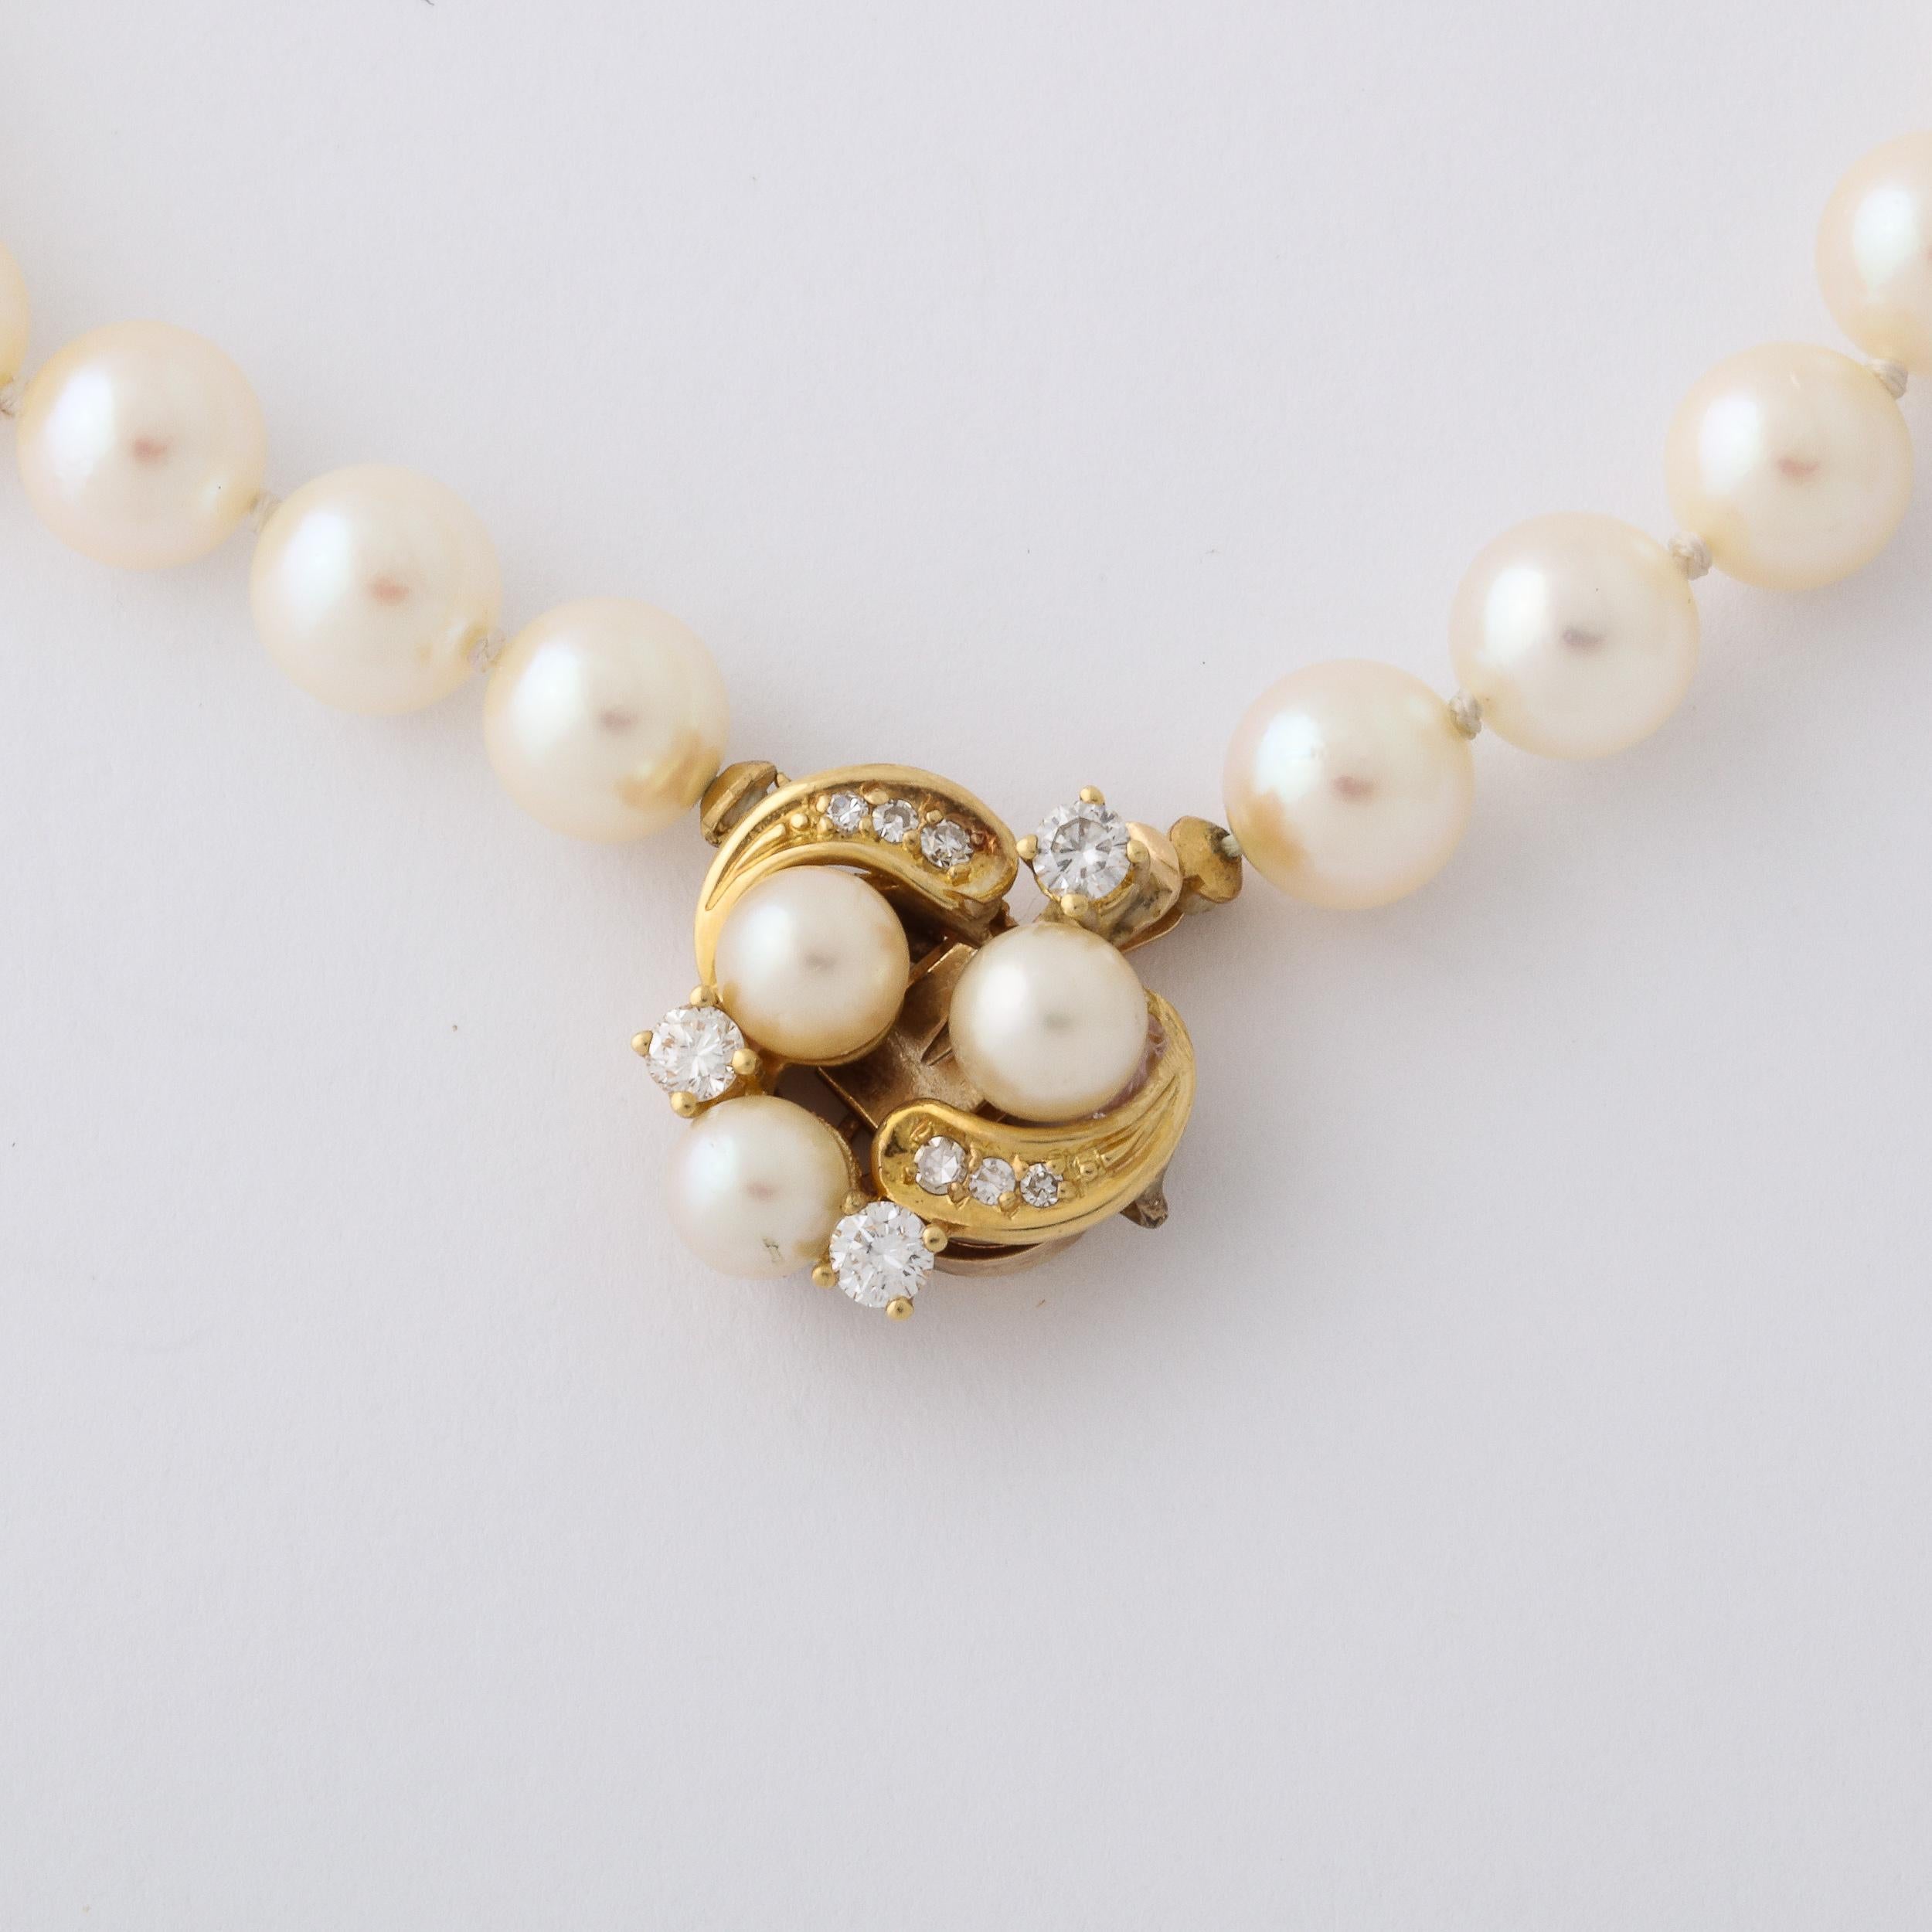 Modernist Pearl Necklace with 14k  Gold , Diamond and Pearl Clasp  8